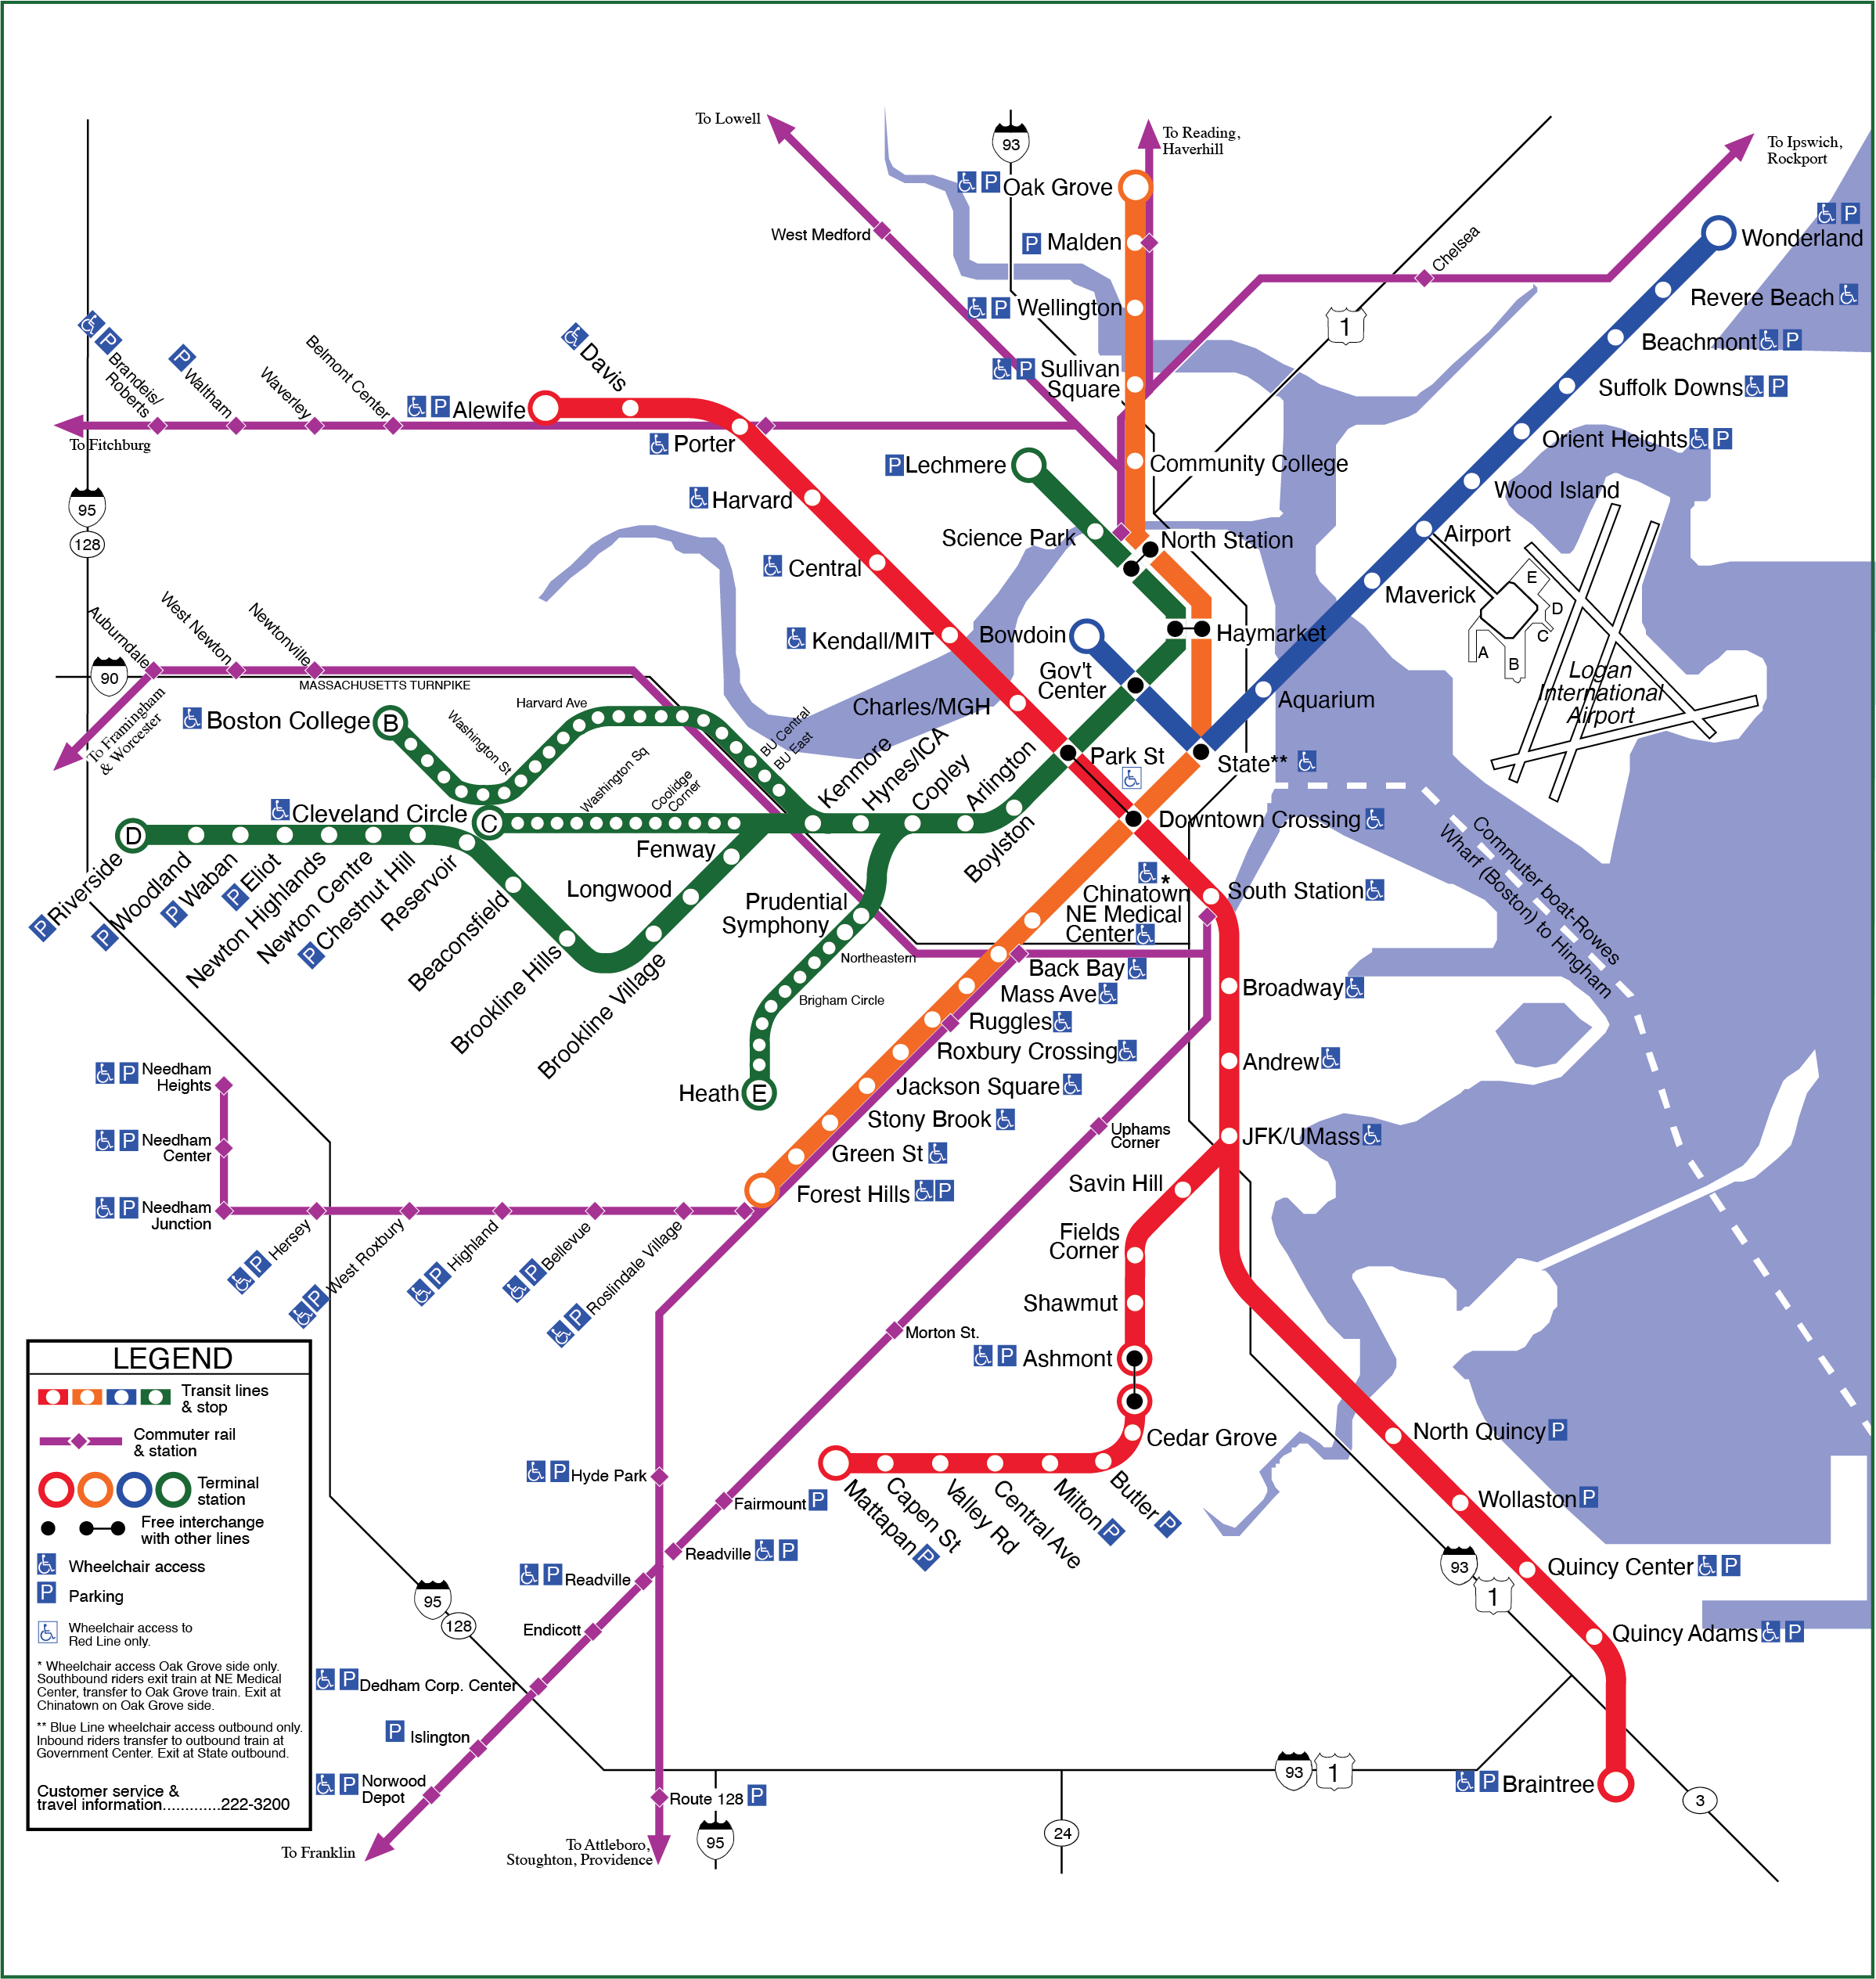 This map includes the four colorful rapid transit lines with station names (though only accessible stations are labeled on the Green Line's B, C, and E branches), purple Commuter Rail lines (with stations labeled), some major freeways labeled, and waterways in bright blue. Accessible stations are labeled, as are stations with parking.